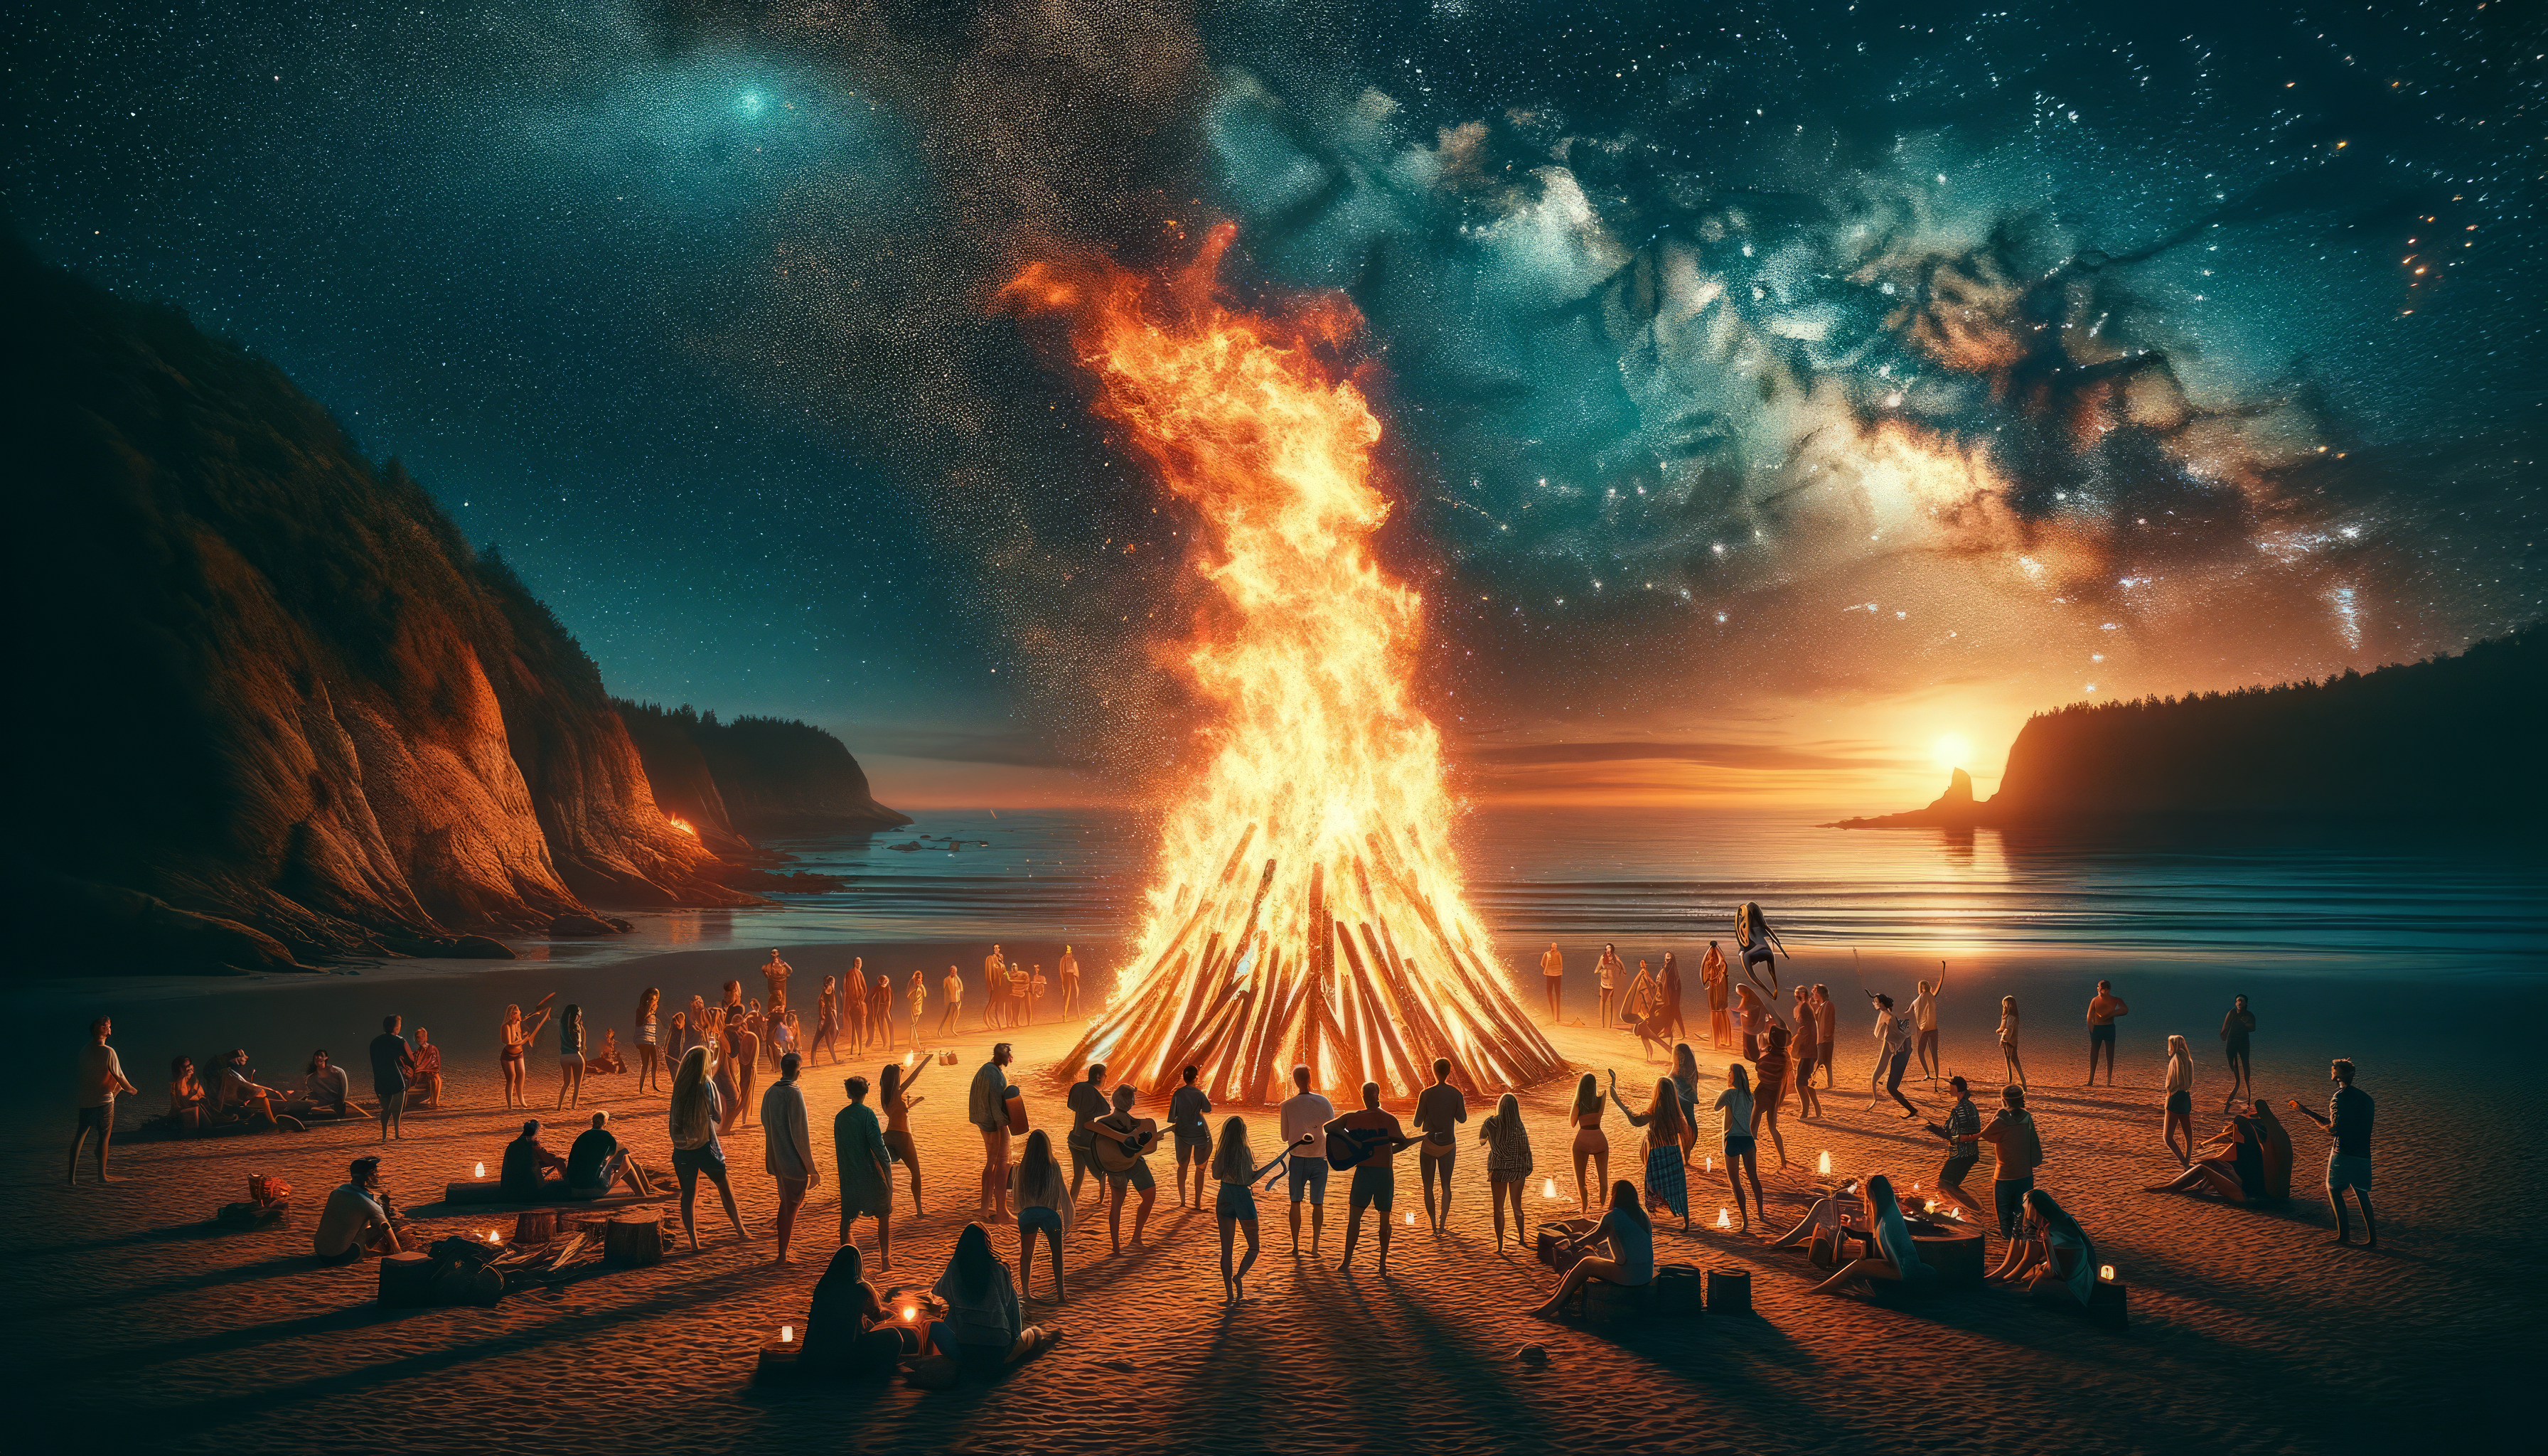 Spectacular beach bonfire at night with people gathered around, under a starry sky, available as an HD desktop wallpaper and background.